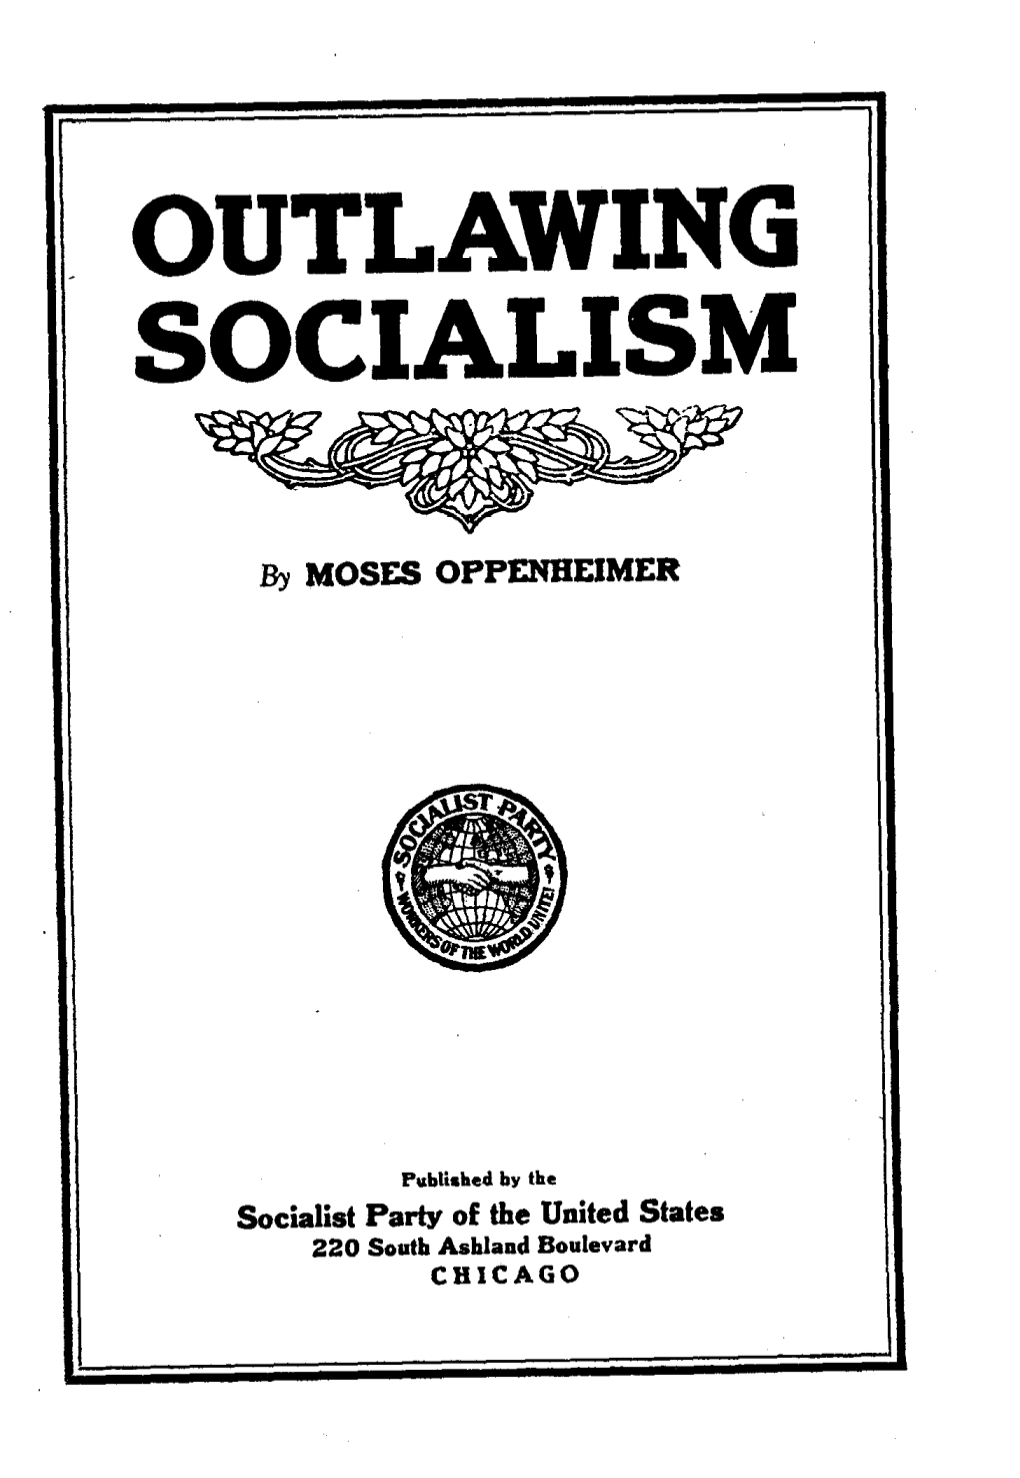 Outlawing Socialism